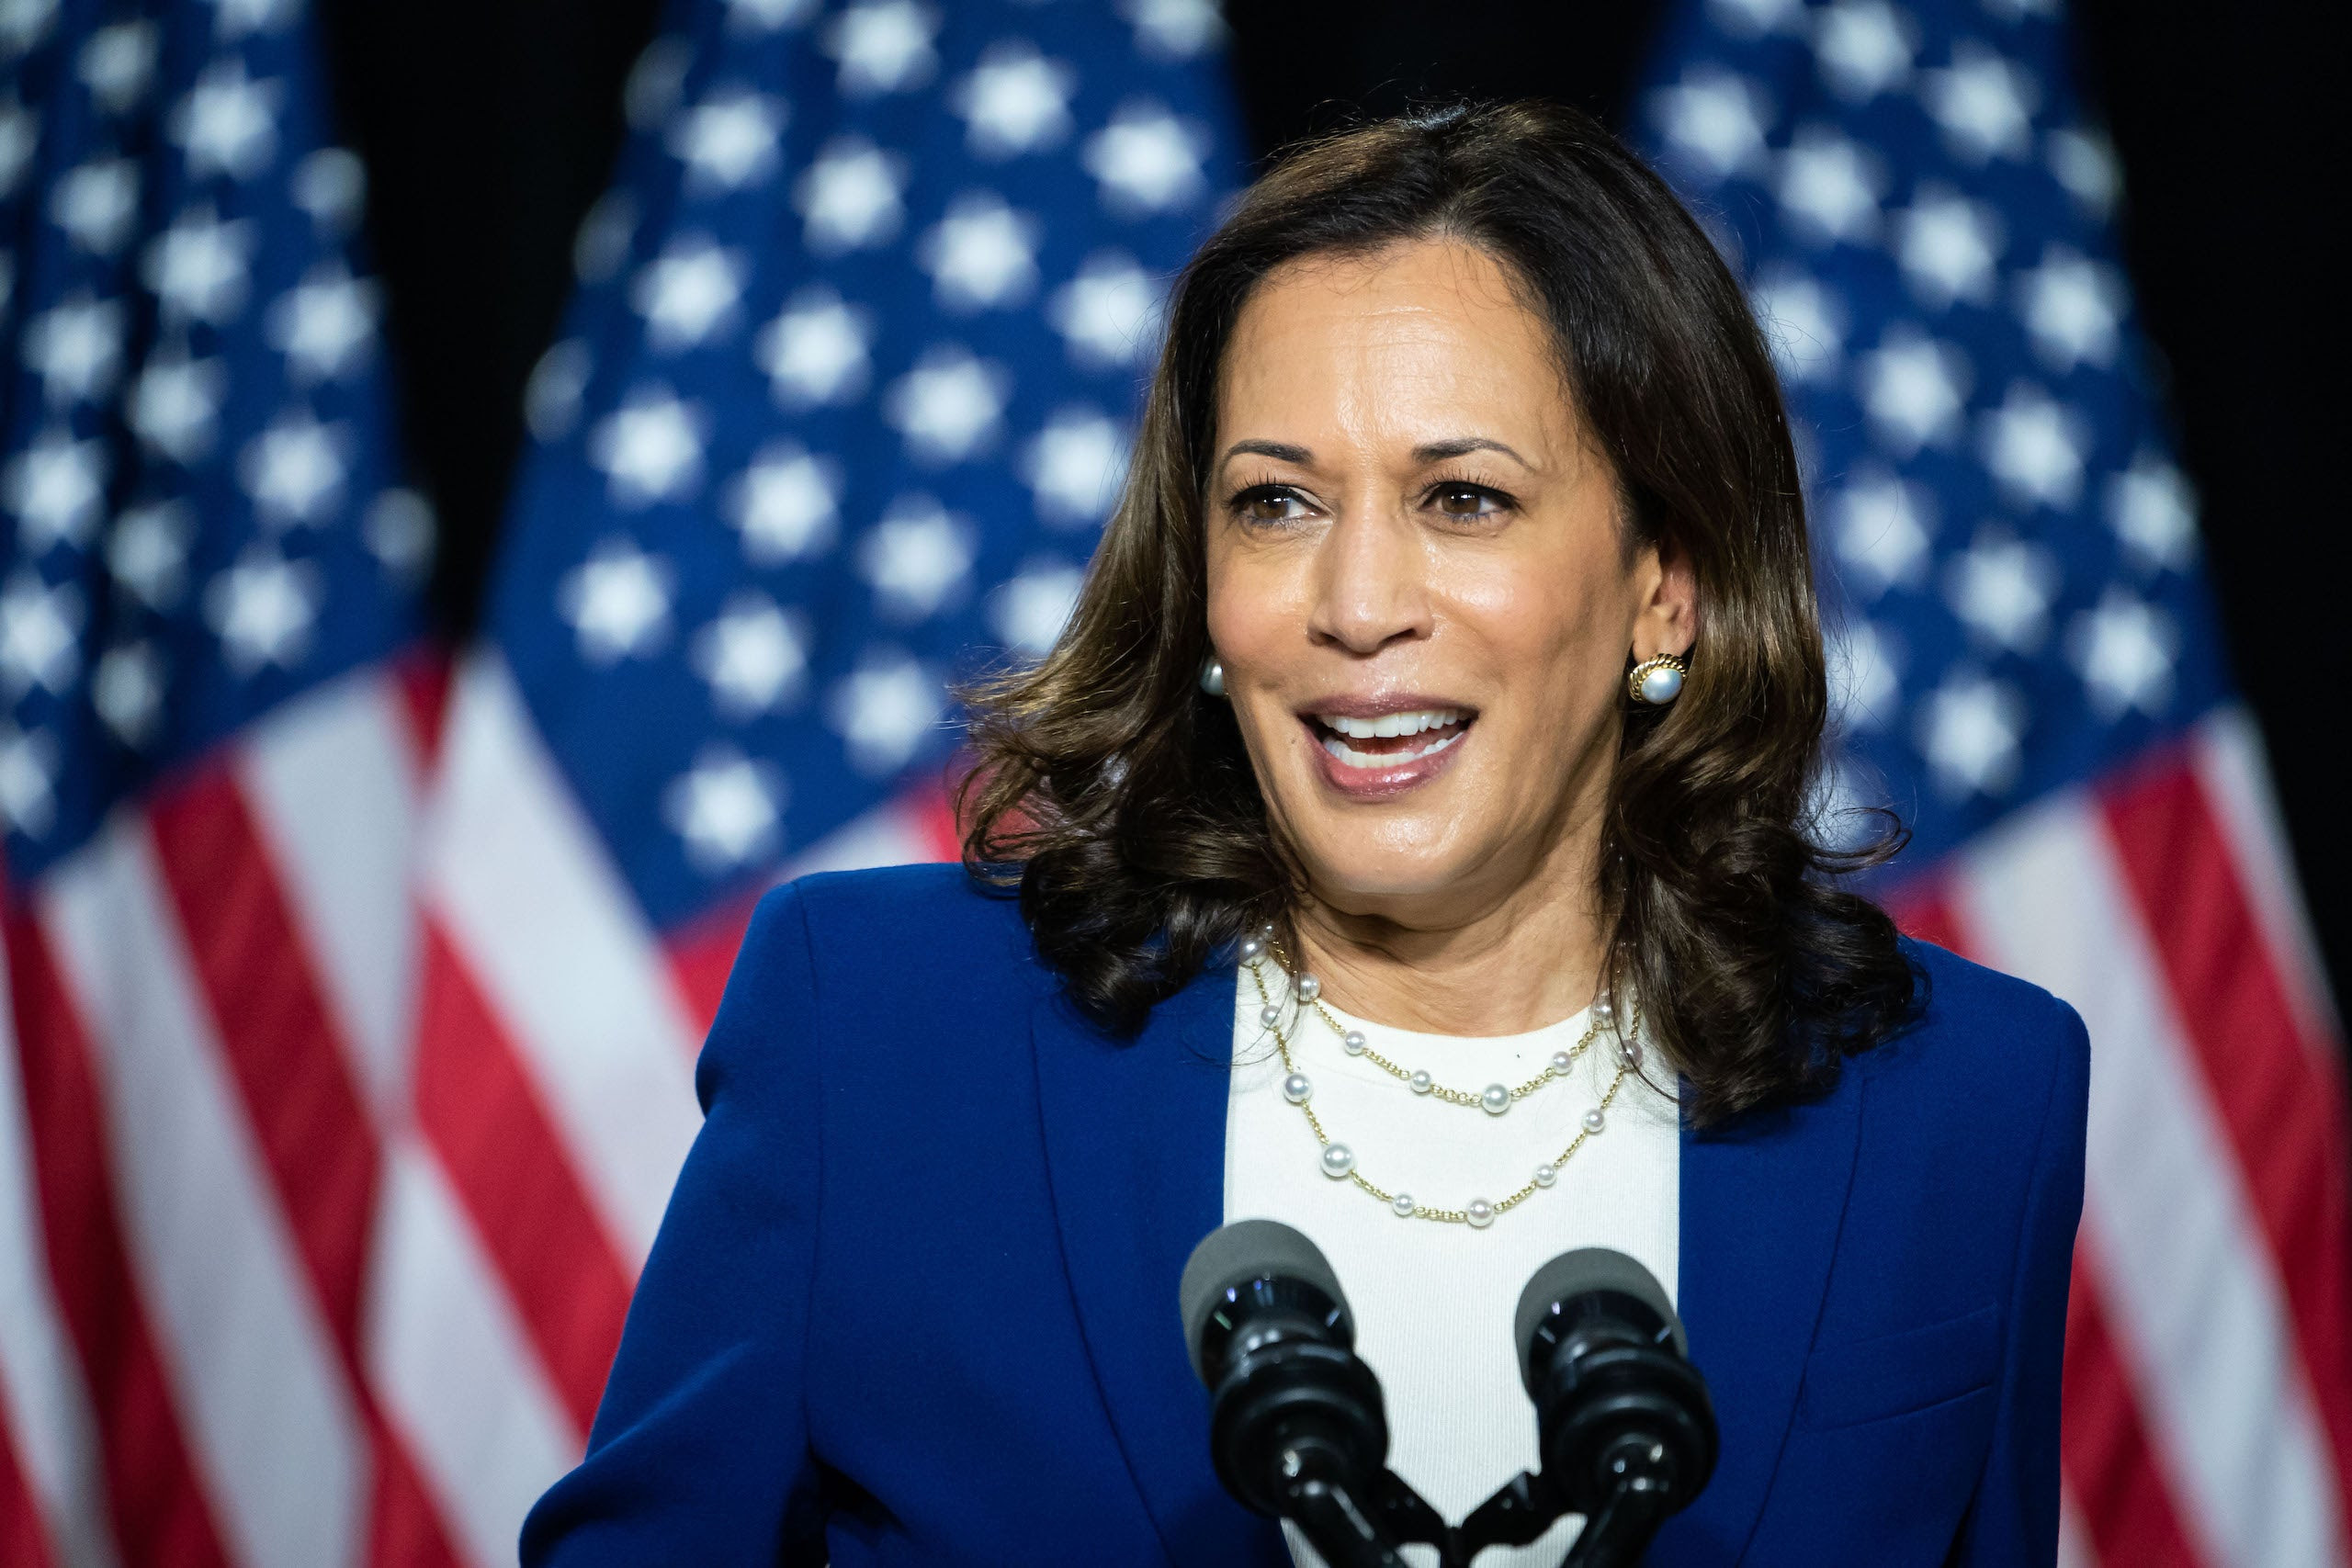 A photo of Kamala Harris speaking at a podium with American flags behind her 